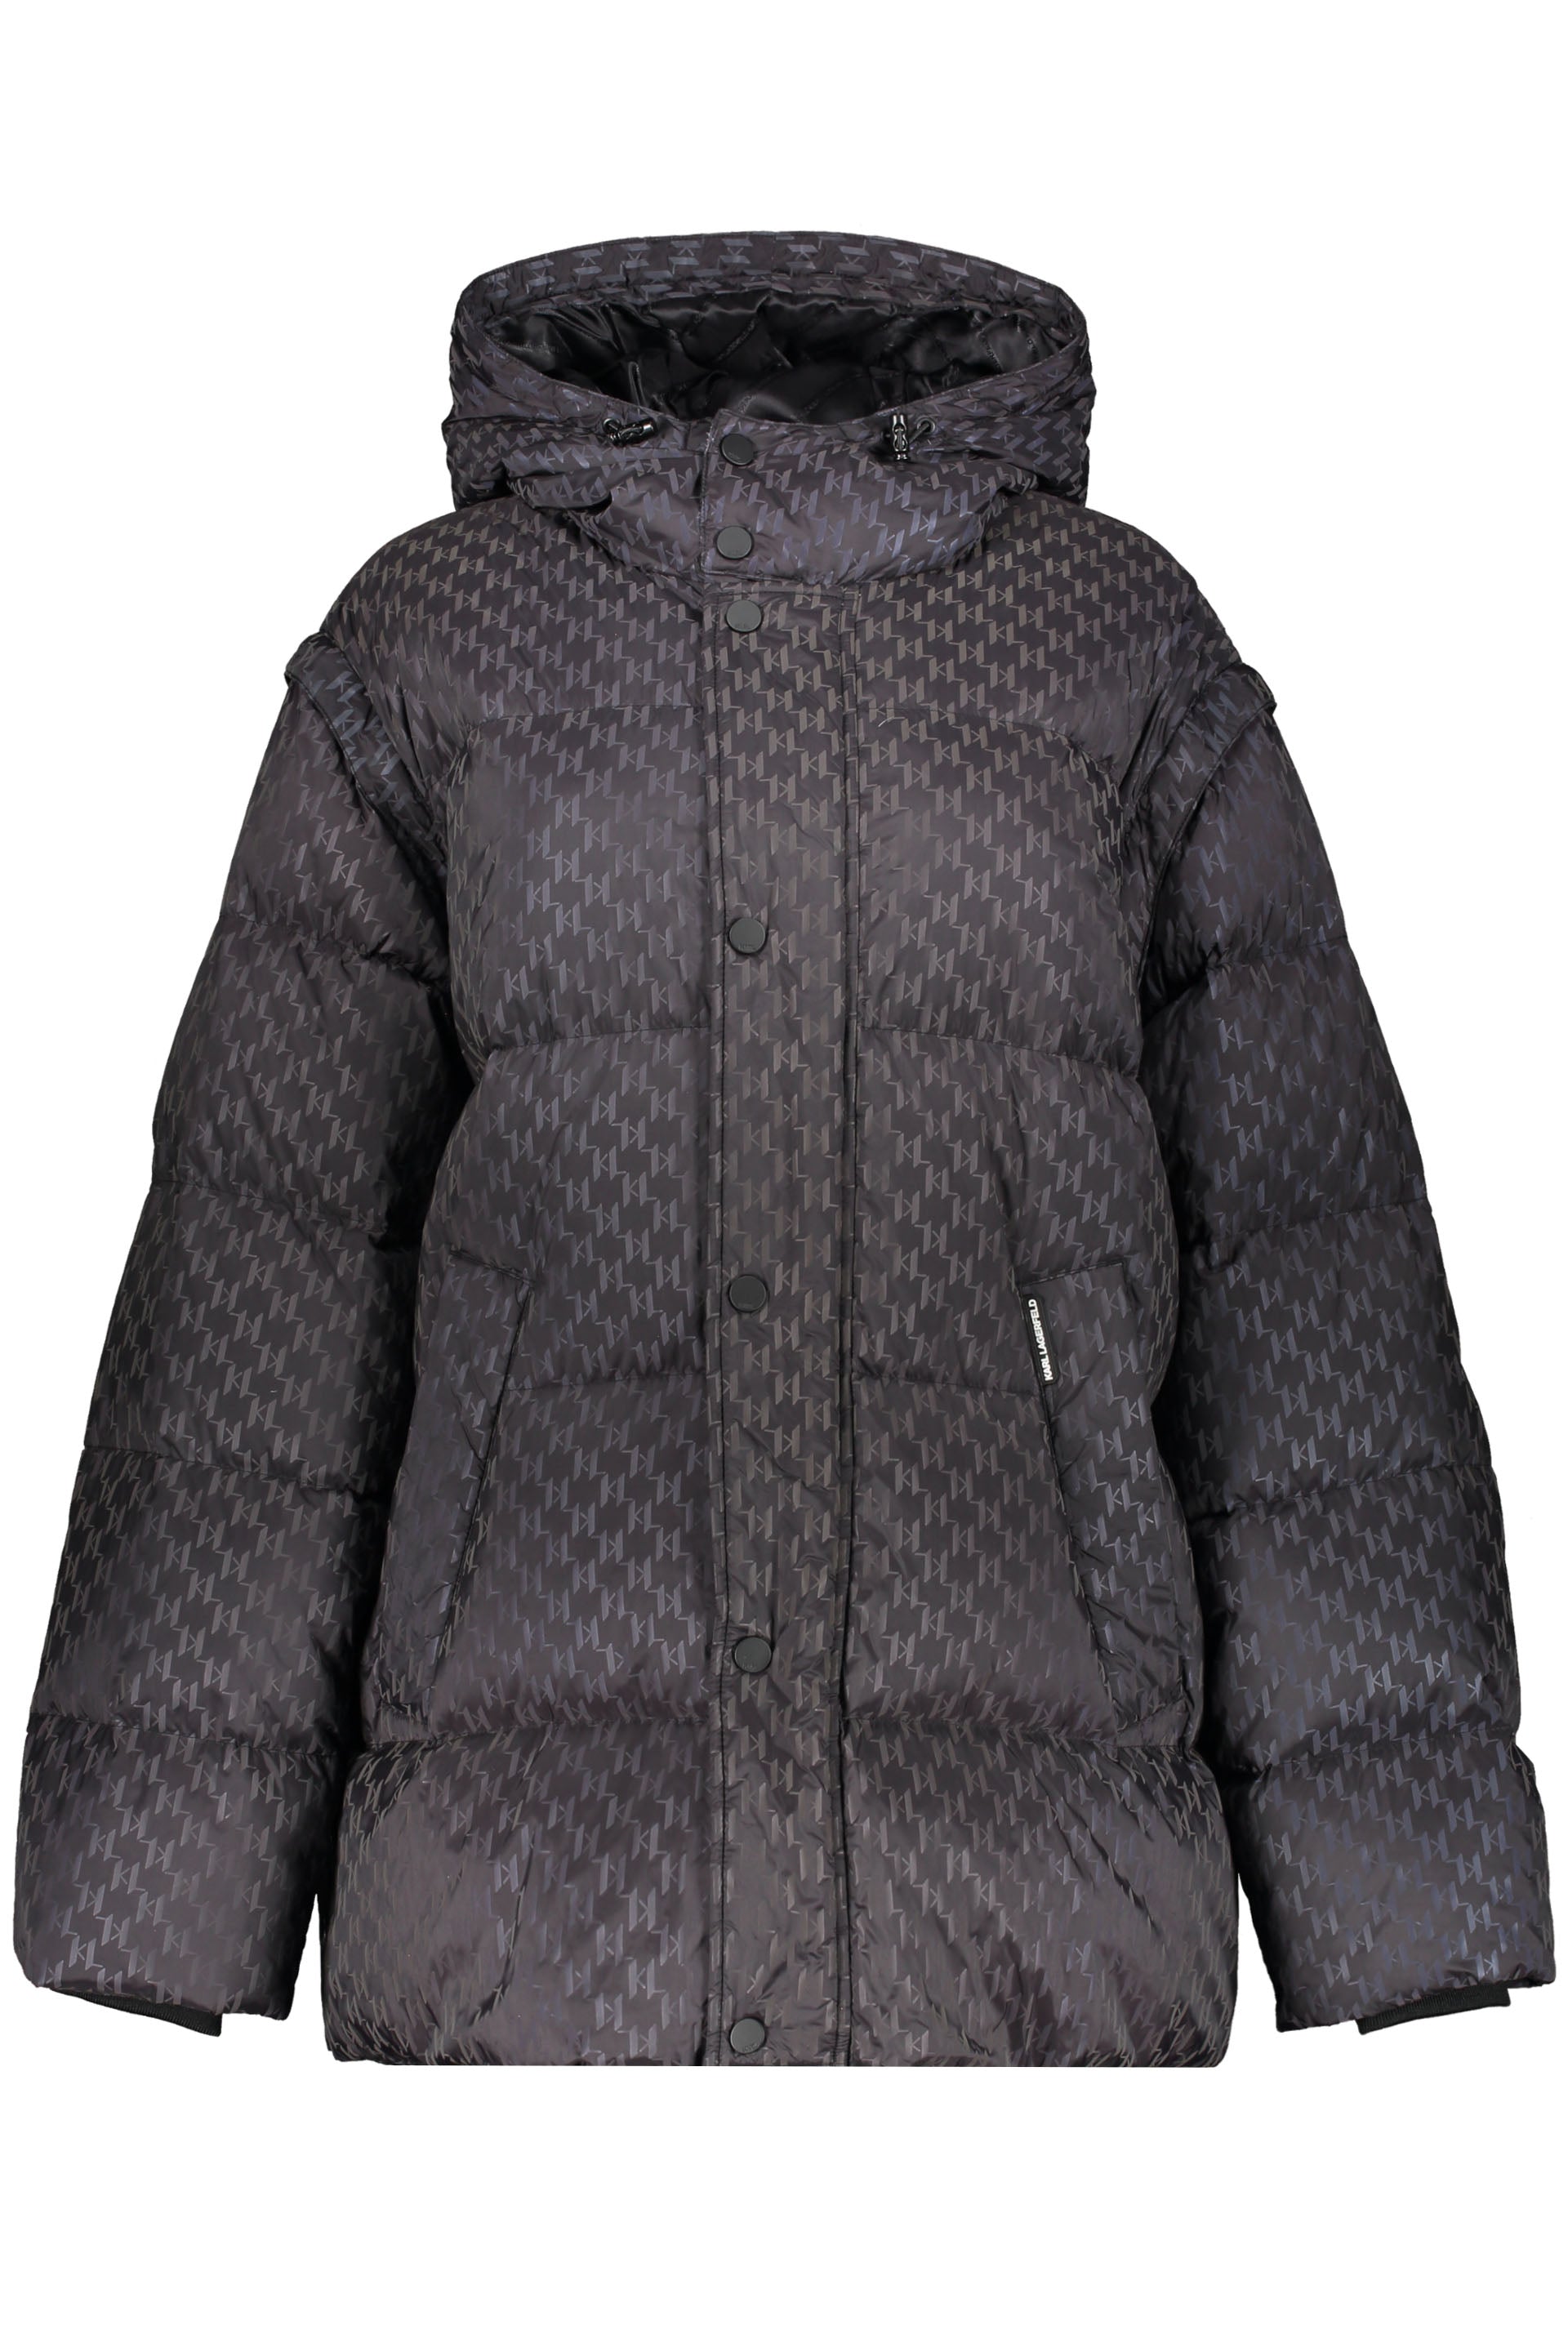 Hooded nylon down jacket-Karl Lagerfeld-OUTLET-SALE-L-ARCHIVIST